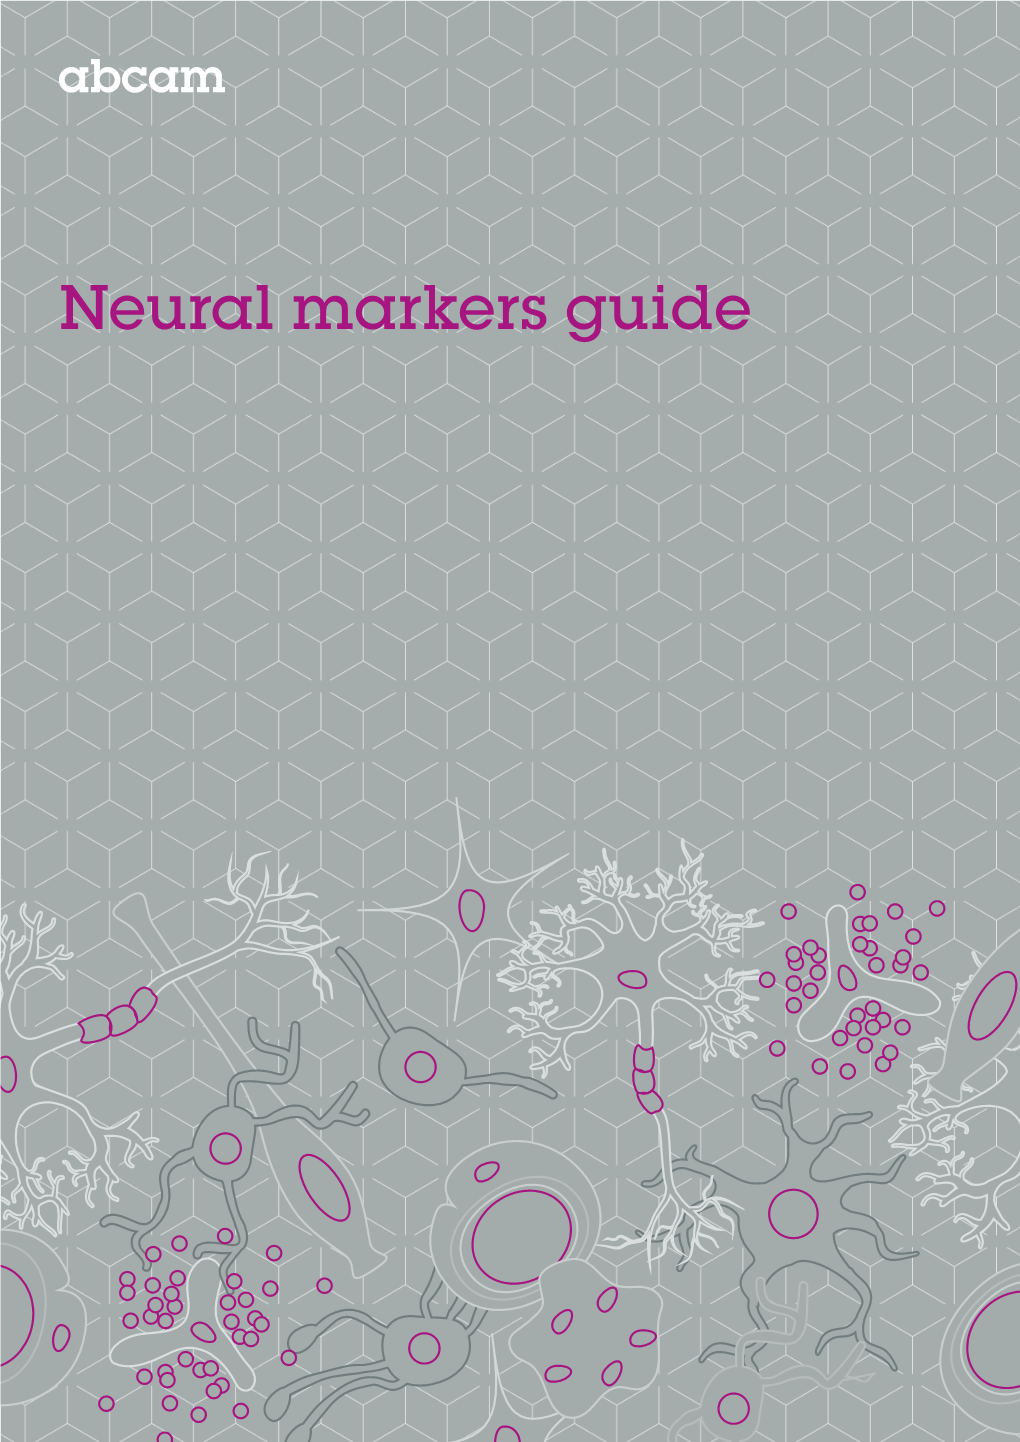 Neural Markers Guide Contents